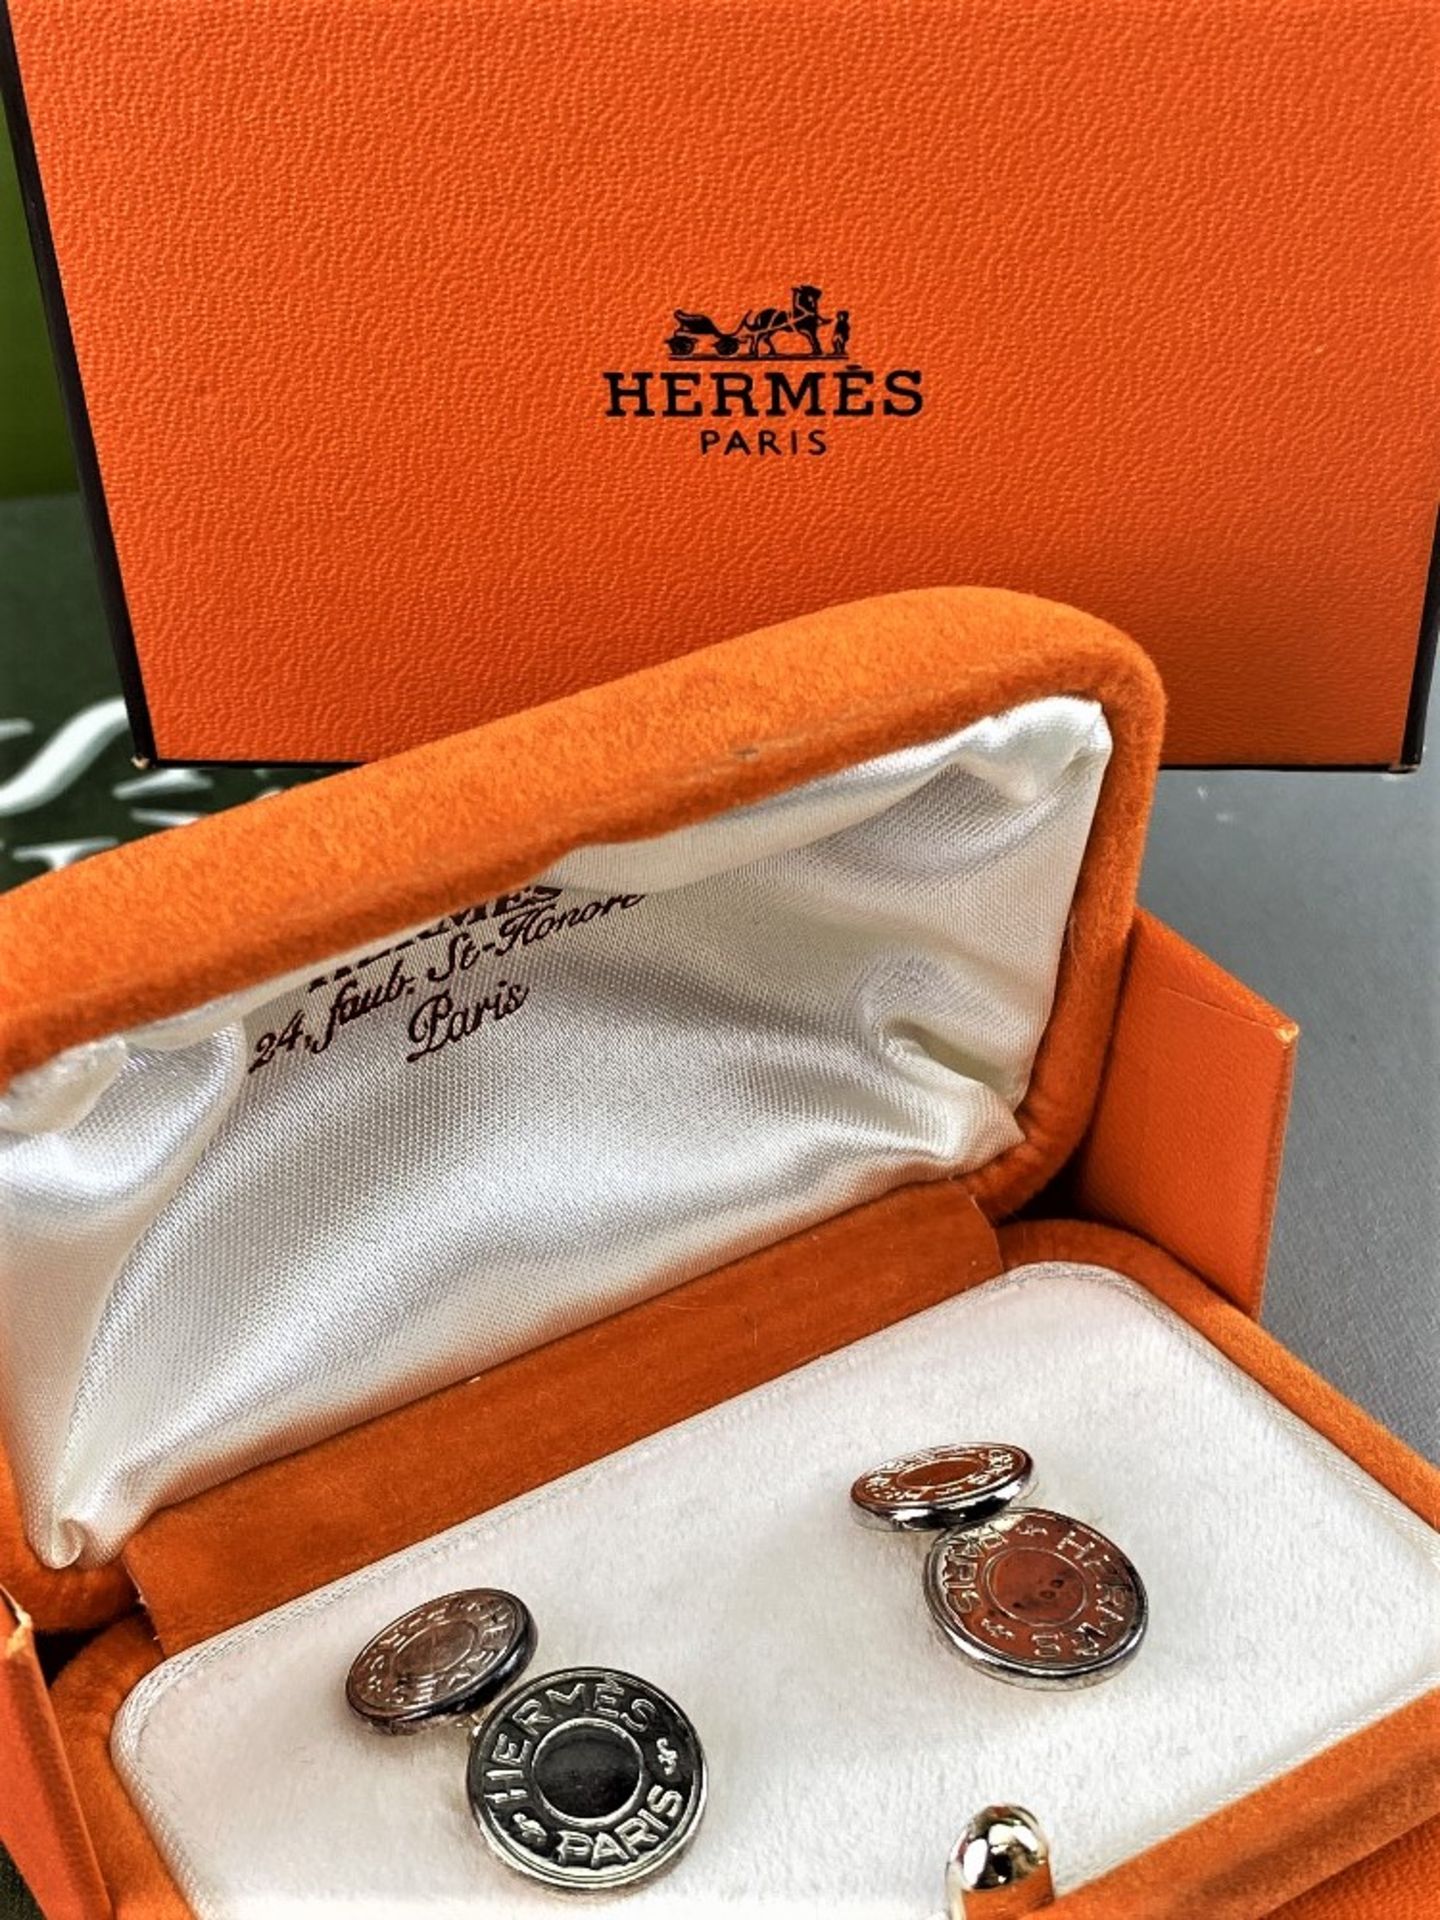 Hermes Classic Circular Solid Silver Cufflinks - Image 2 of 3